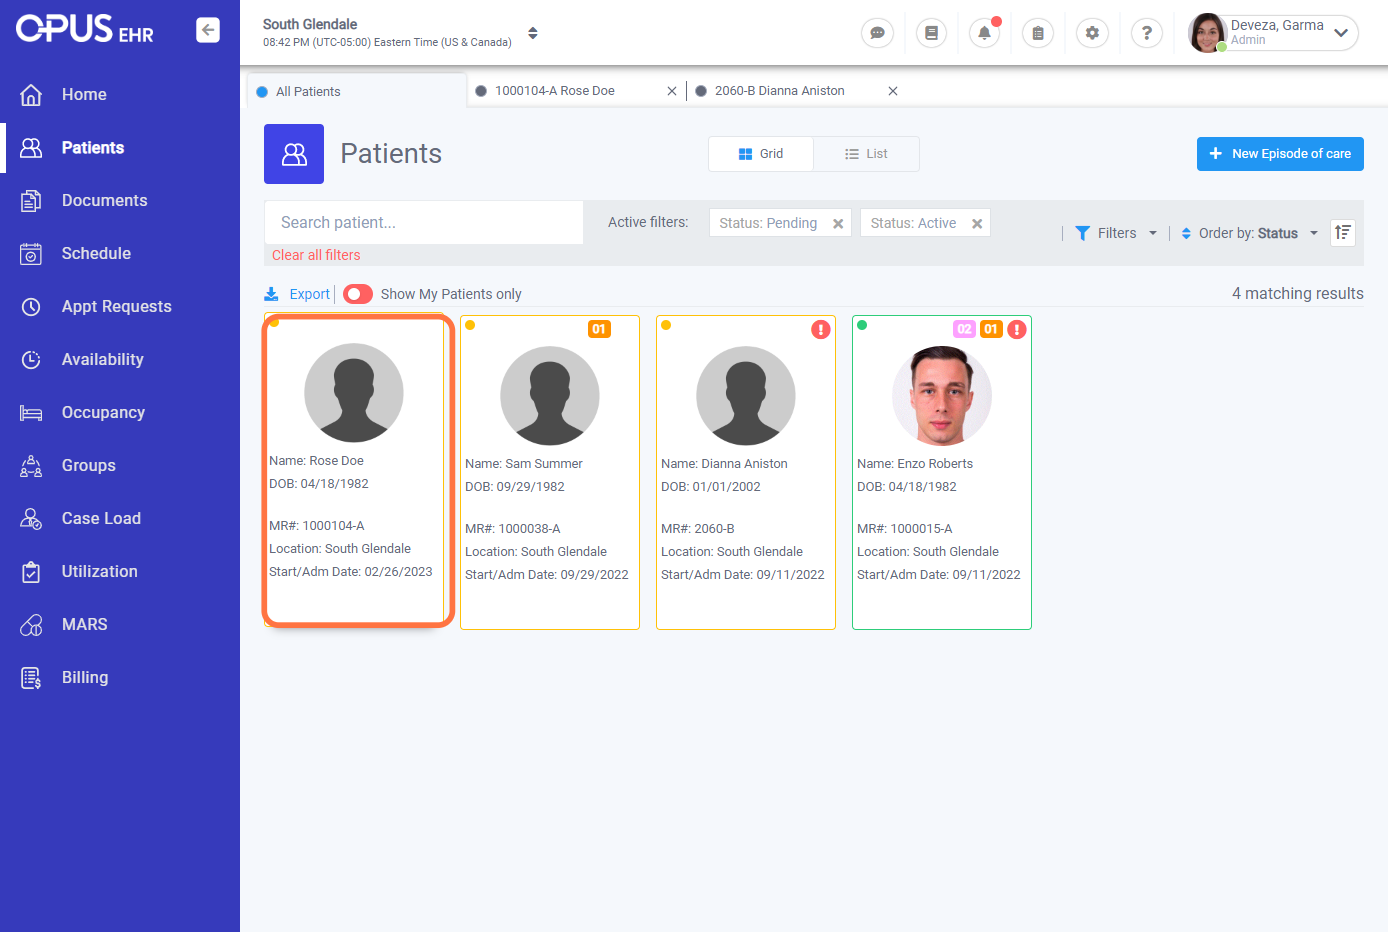 Select the profile of the patient you wish to assign the badge to.